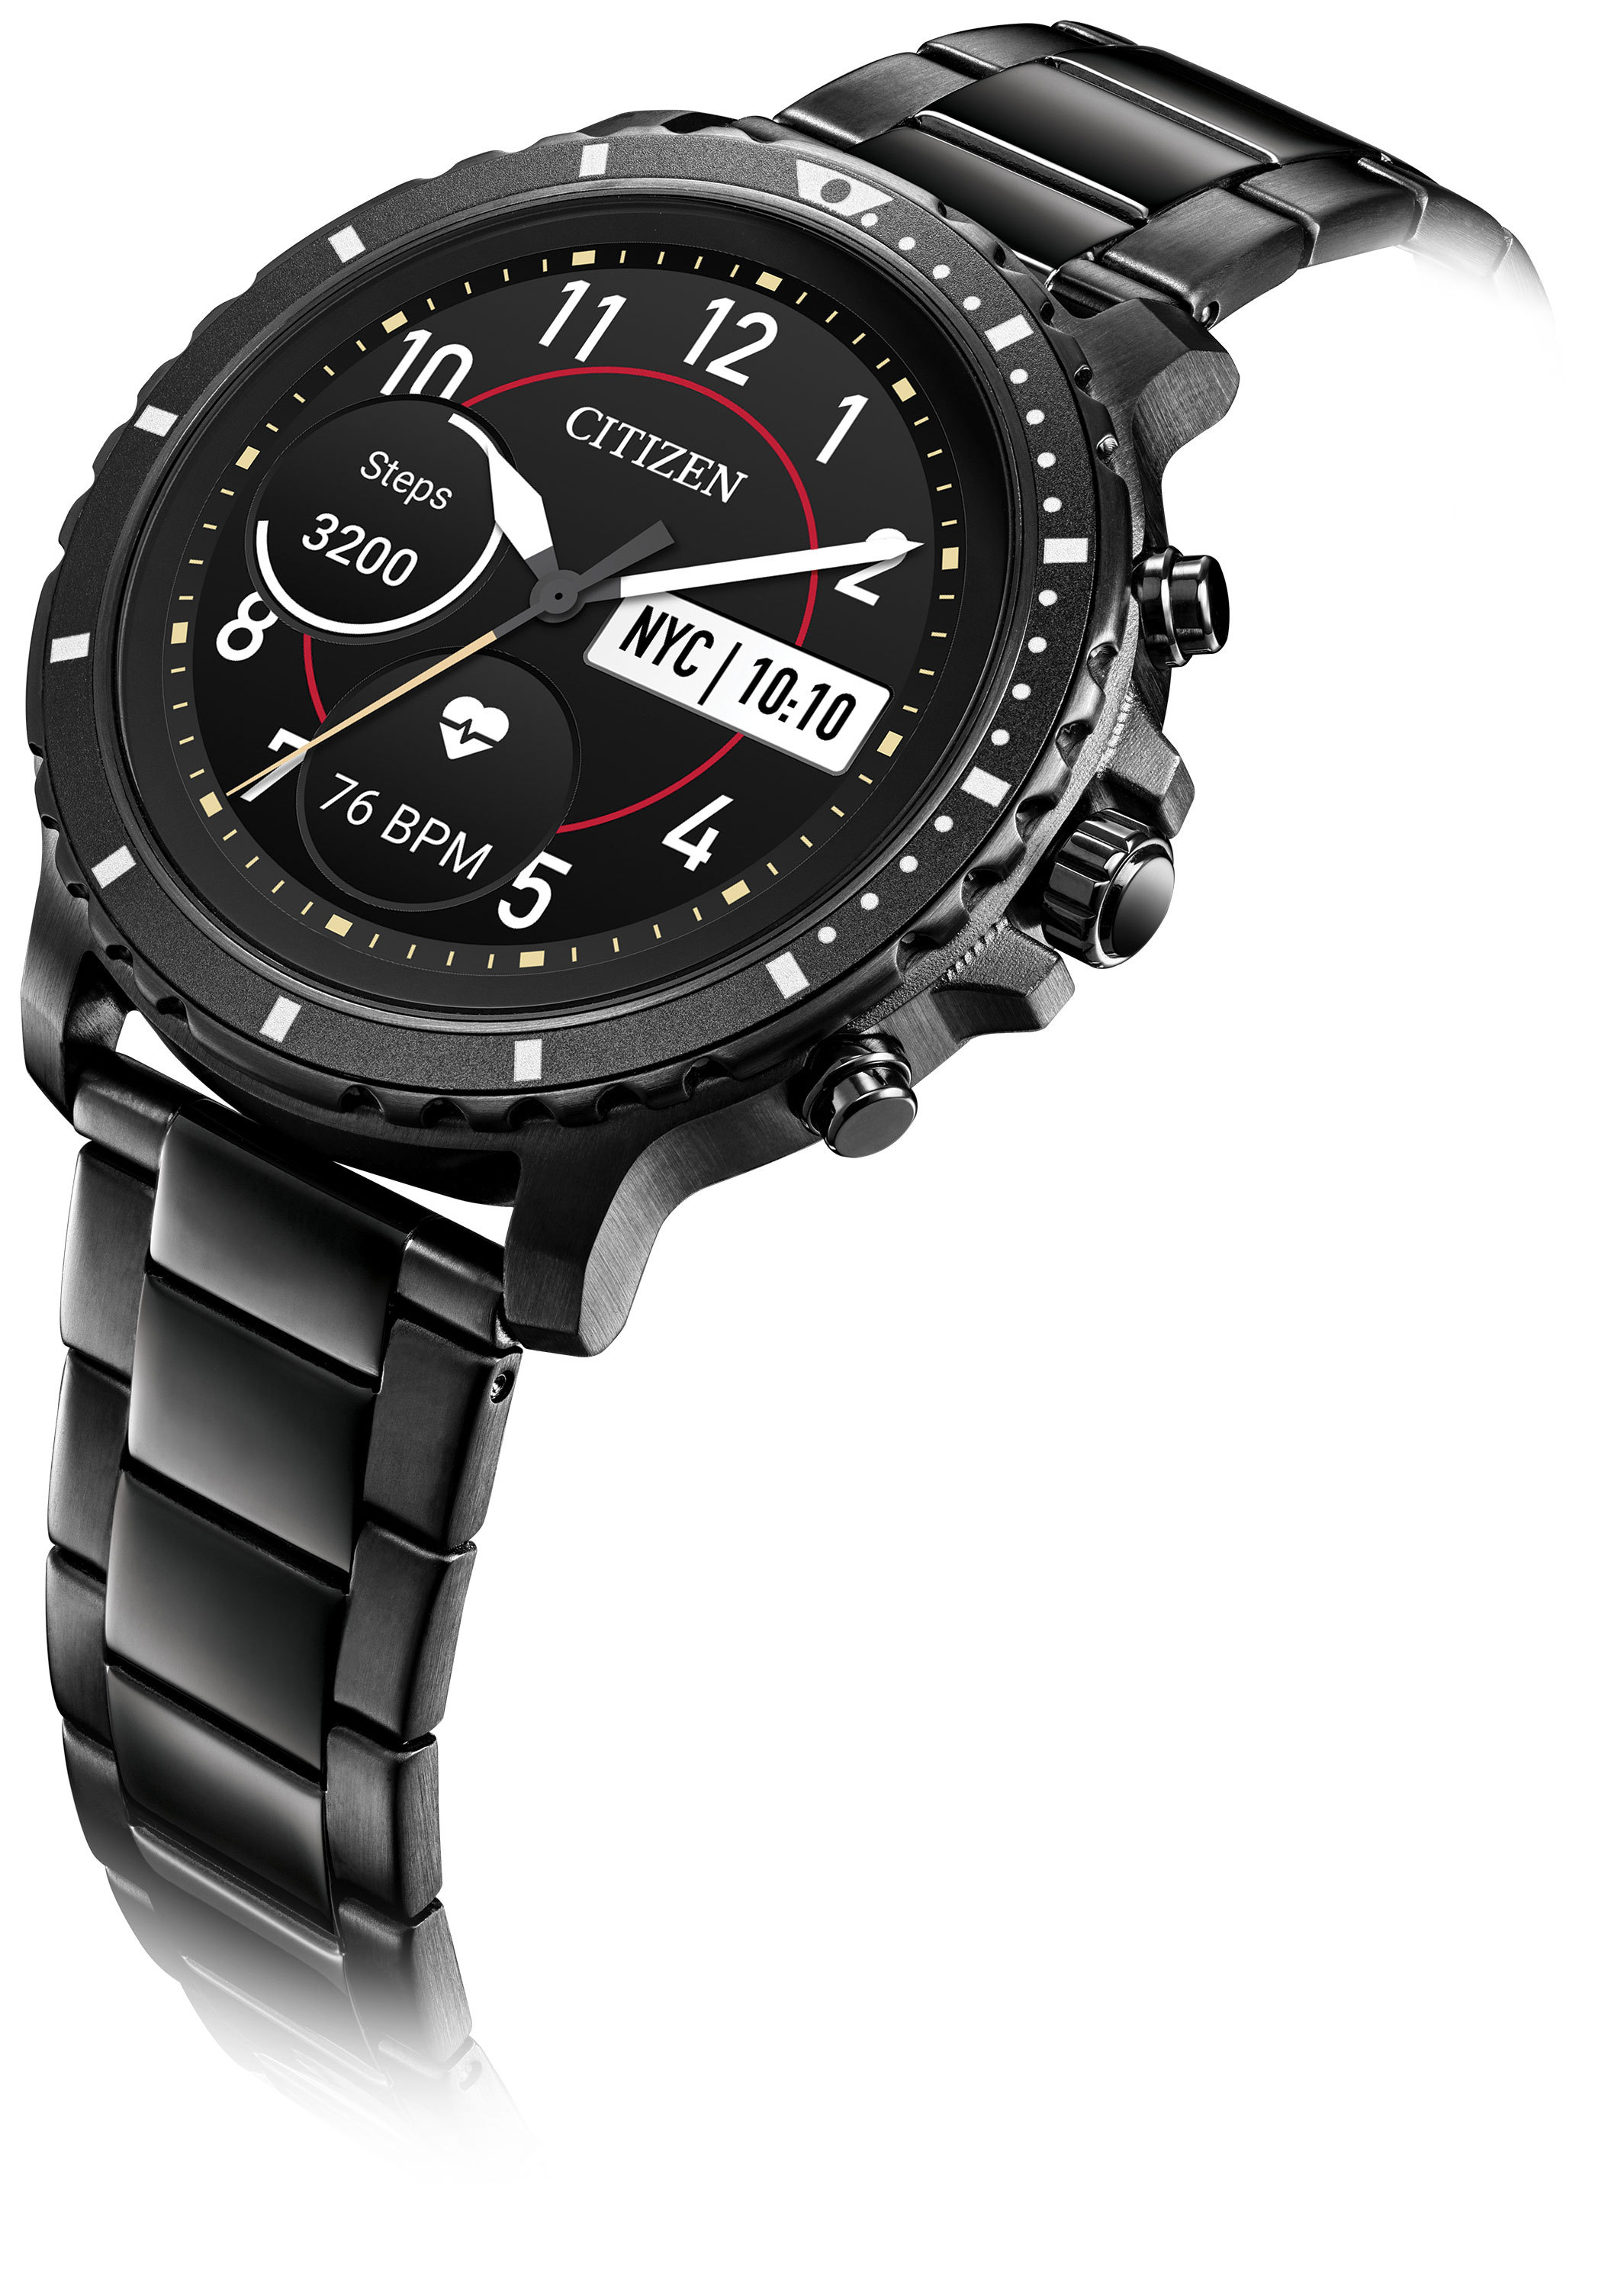 Citizen Introduces Its First Full Digital Display Smartwatch: CZ Smart |  Business Wire